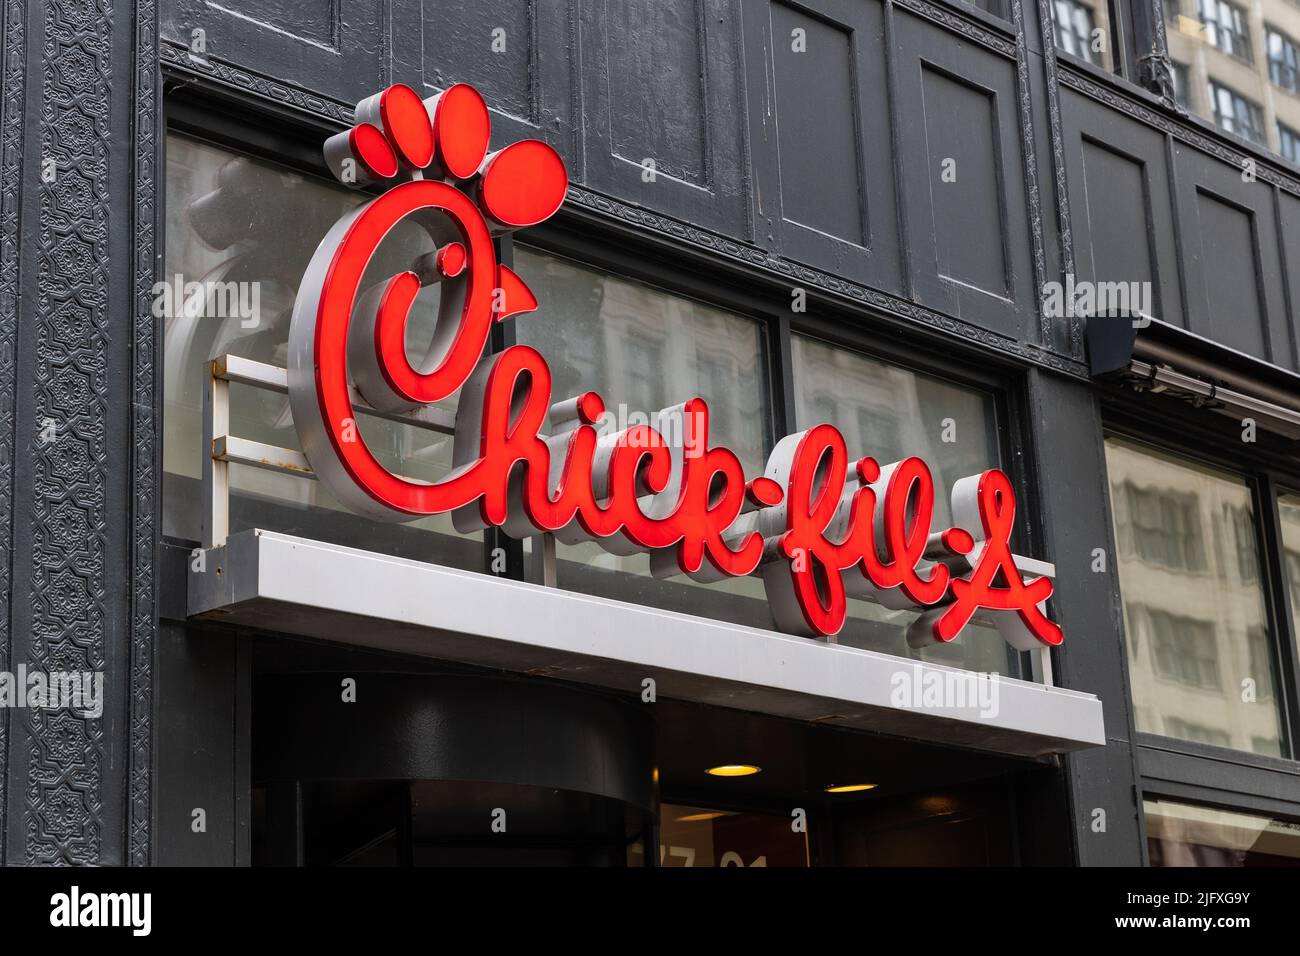 A Chick-Fil-A logo at a store in downtown Chicago. Chick-fil-A is one of the largest American fast food restaurant chains. Stock Photo